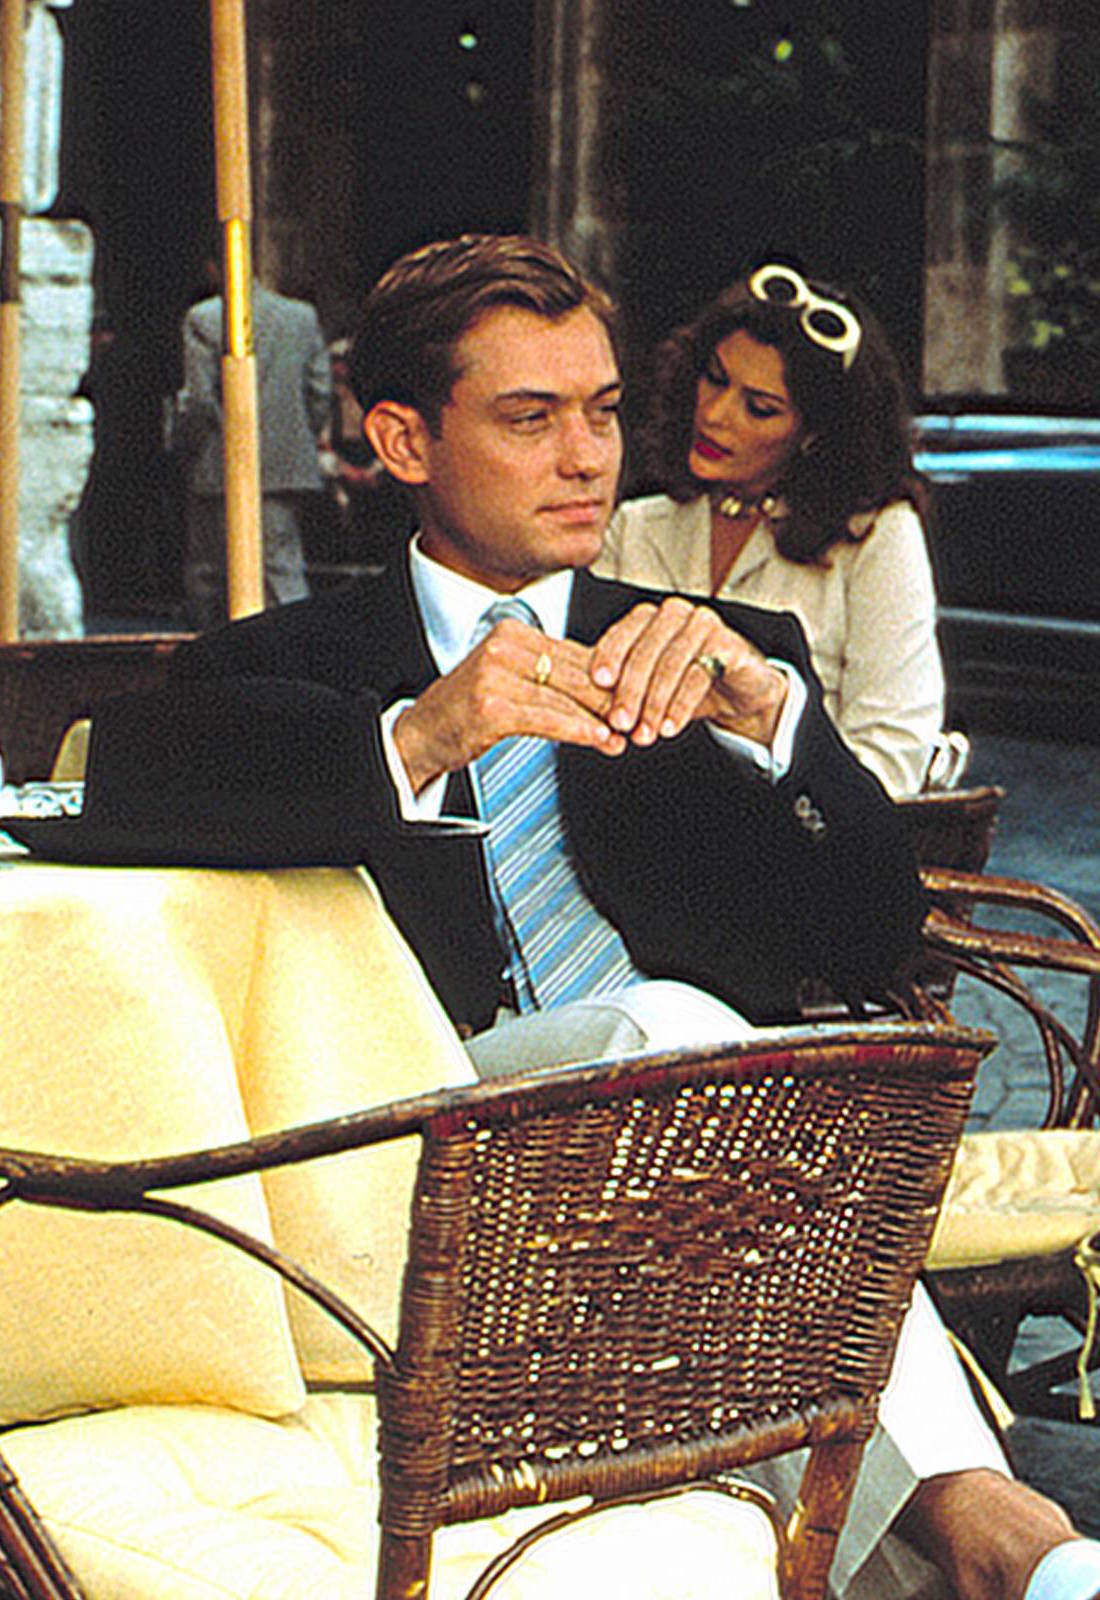 Dress the Part: The Talented Mr. Ripley